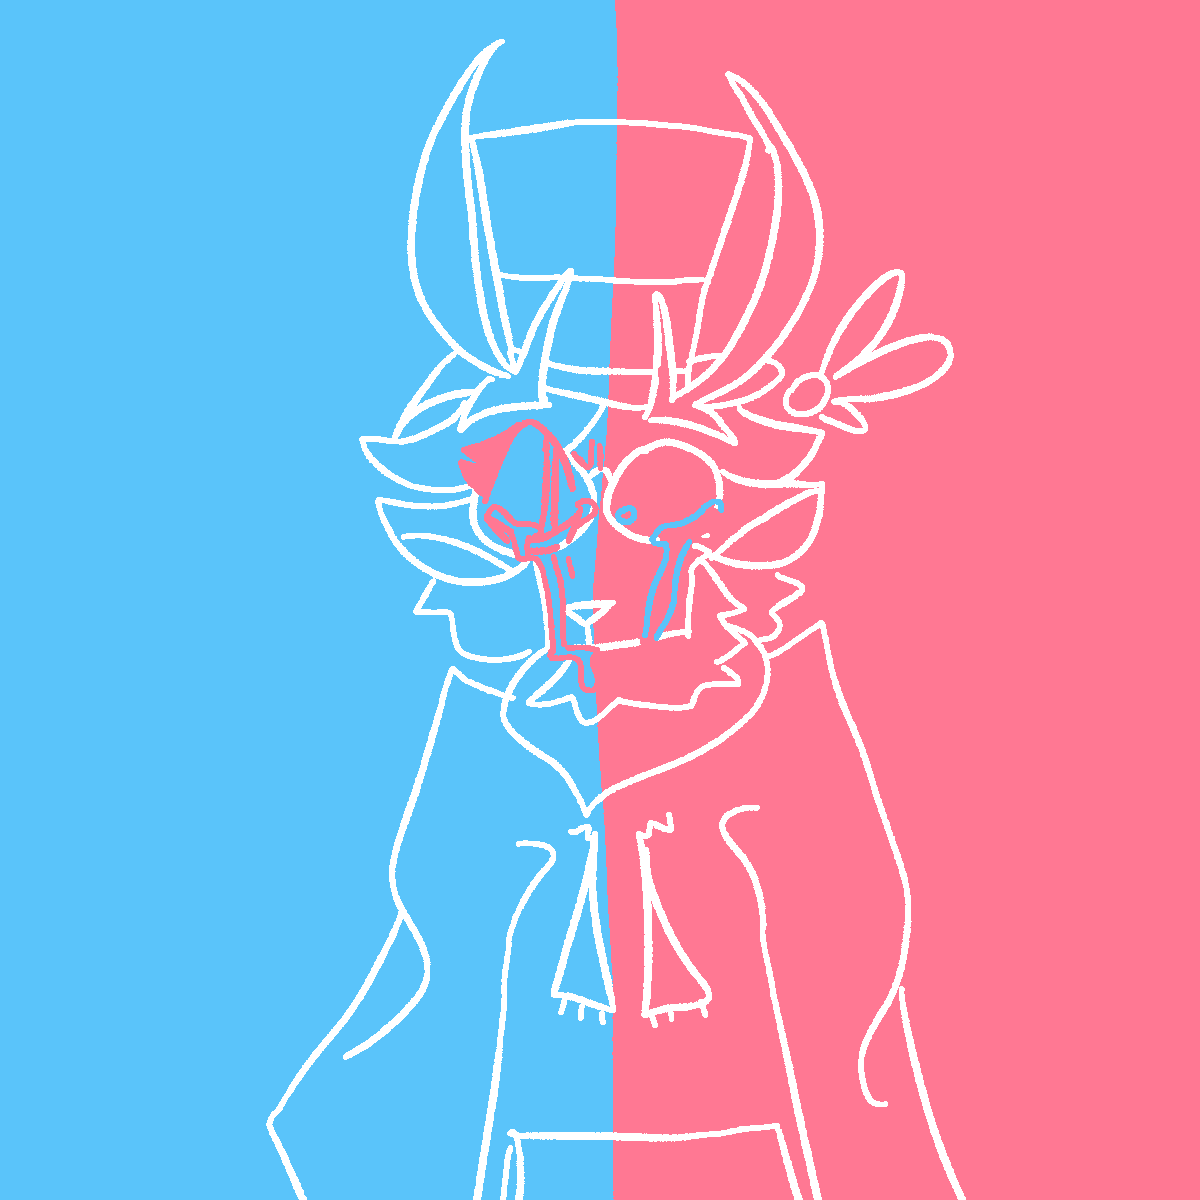 a drawing of my sona named horizon. the drawing is split into halves by colour. the left is baby blue, and the right is a light pink. horizon is crying angrily. the eye on the left side is drawn in pink. there is no eye drawn on the right side.